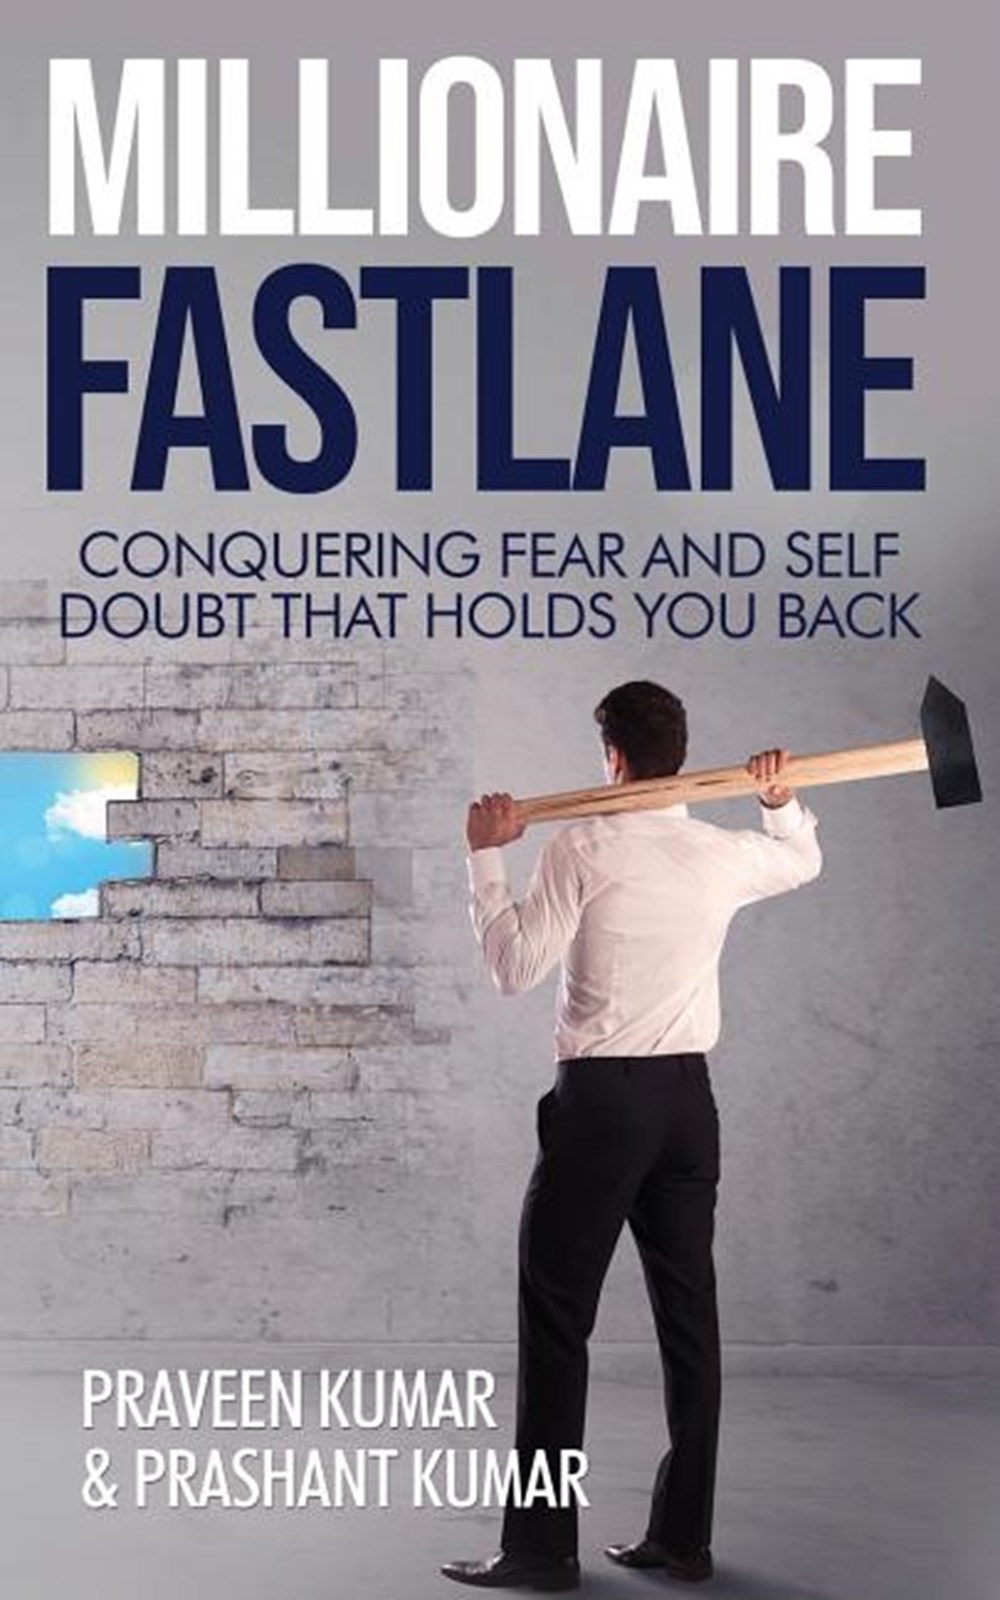 Millionaire Fastlane: Conquering Fear and Self Doubt that Holds You Back